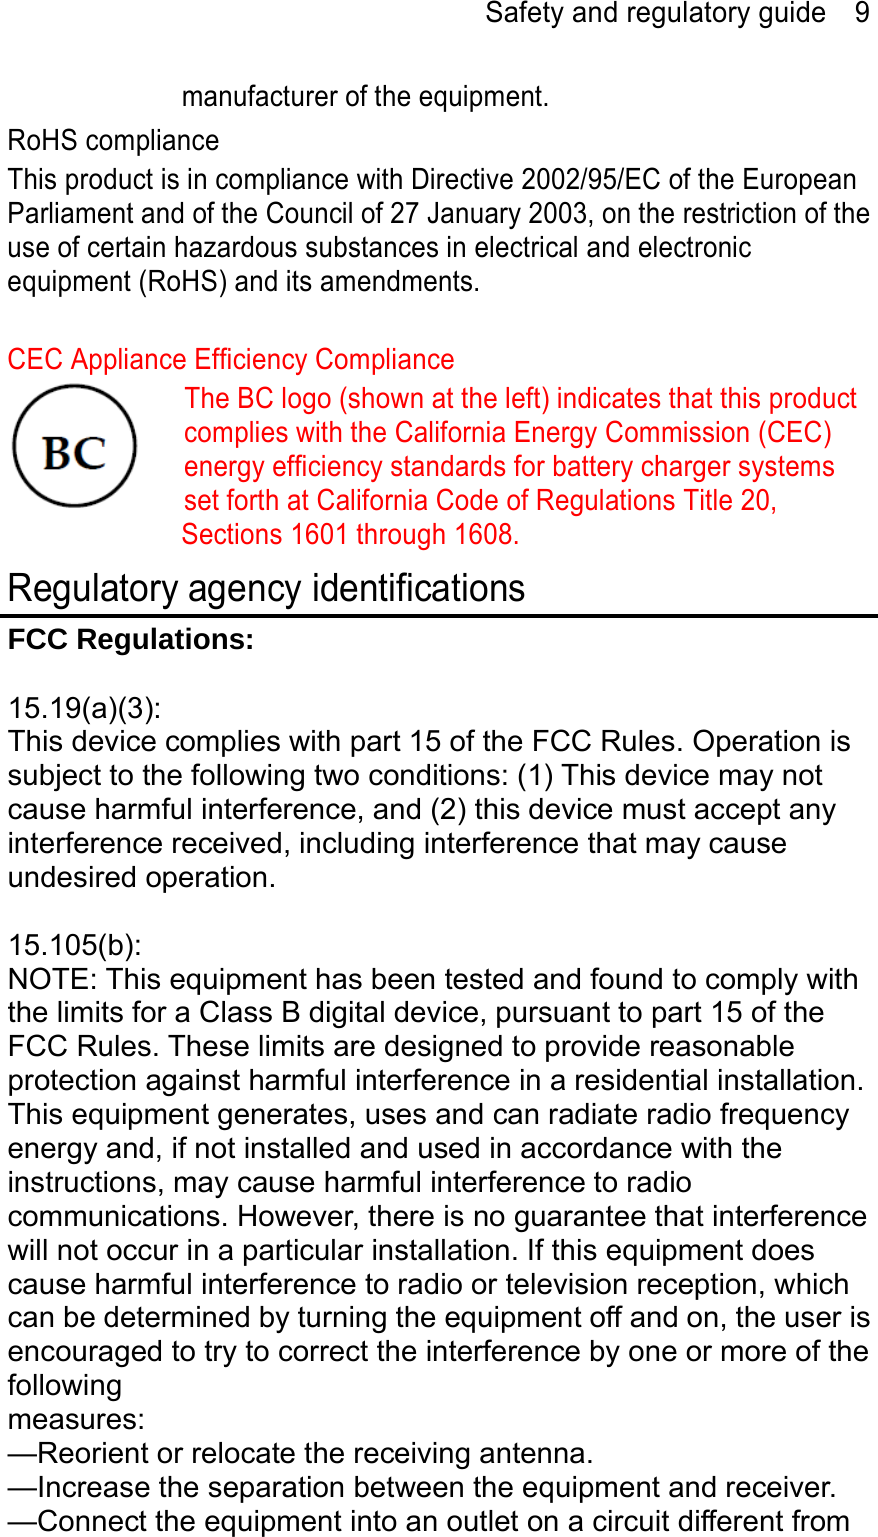 Safety and regulatory guide    9 manufacturer of the equipment. RoHS compliance This product is in compliance with Directive 2002/95/EC of the European Parliament and of the Council of 27 January 2003, on the restriction of the use of certain hazardous substances in electrical and electronic equipment (RoHS) and its amendments.  CEC Appliance Efficiency Compliance The BC logo (shown at the left) indicates that this product complies with the California Energy Commission (CEC) energy efficiency standards for battery charger systems set forth at California Code of Regulations Title 20, Sections 1601 through 1608. Regulatory agency identifications FCC Regulations:  15.19(a)(3): This device complies with part 15 of the FCC Rules. Operation is subject to the following two conditions: (1) This device may not cause harmful interference, and (2) this device must accept any interference received, including interference that may cause undesired operation.  15.105(b): NOTE: This equipment has been tested and found to comply with the limits for a Class B digital device, pursuant to part 15 of the FCC Rules. These limits are designed to provide reasonable protection against harmful interference in a residential installation. This equipment generates, uses and can radiate radio frequency energy and, if not installed and used in accordance with the instructions, may cause harmful interference to radio communications. However, there is no guarantee that interference will not occur in a particular installation. If this equipment does cause harmful interference to radio or television reception, which can be determined by turning the equipment off and on, the user is encouraged to try to correct the interference by one or more of the following measures: —Reorient or relocate the receiving antenna. —Increase the separation between the equipment and receiver. —Connect the equipment into an outlet on a circuit different from 